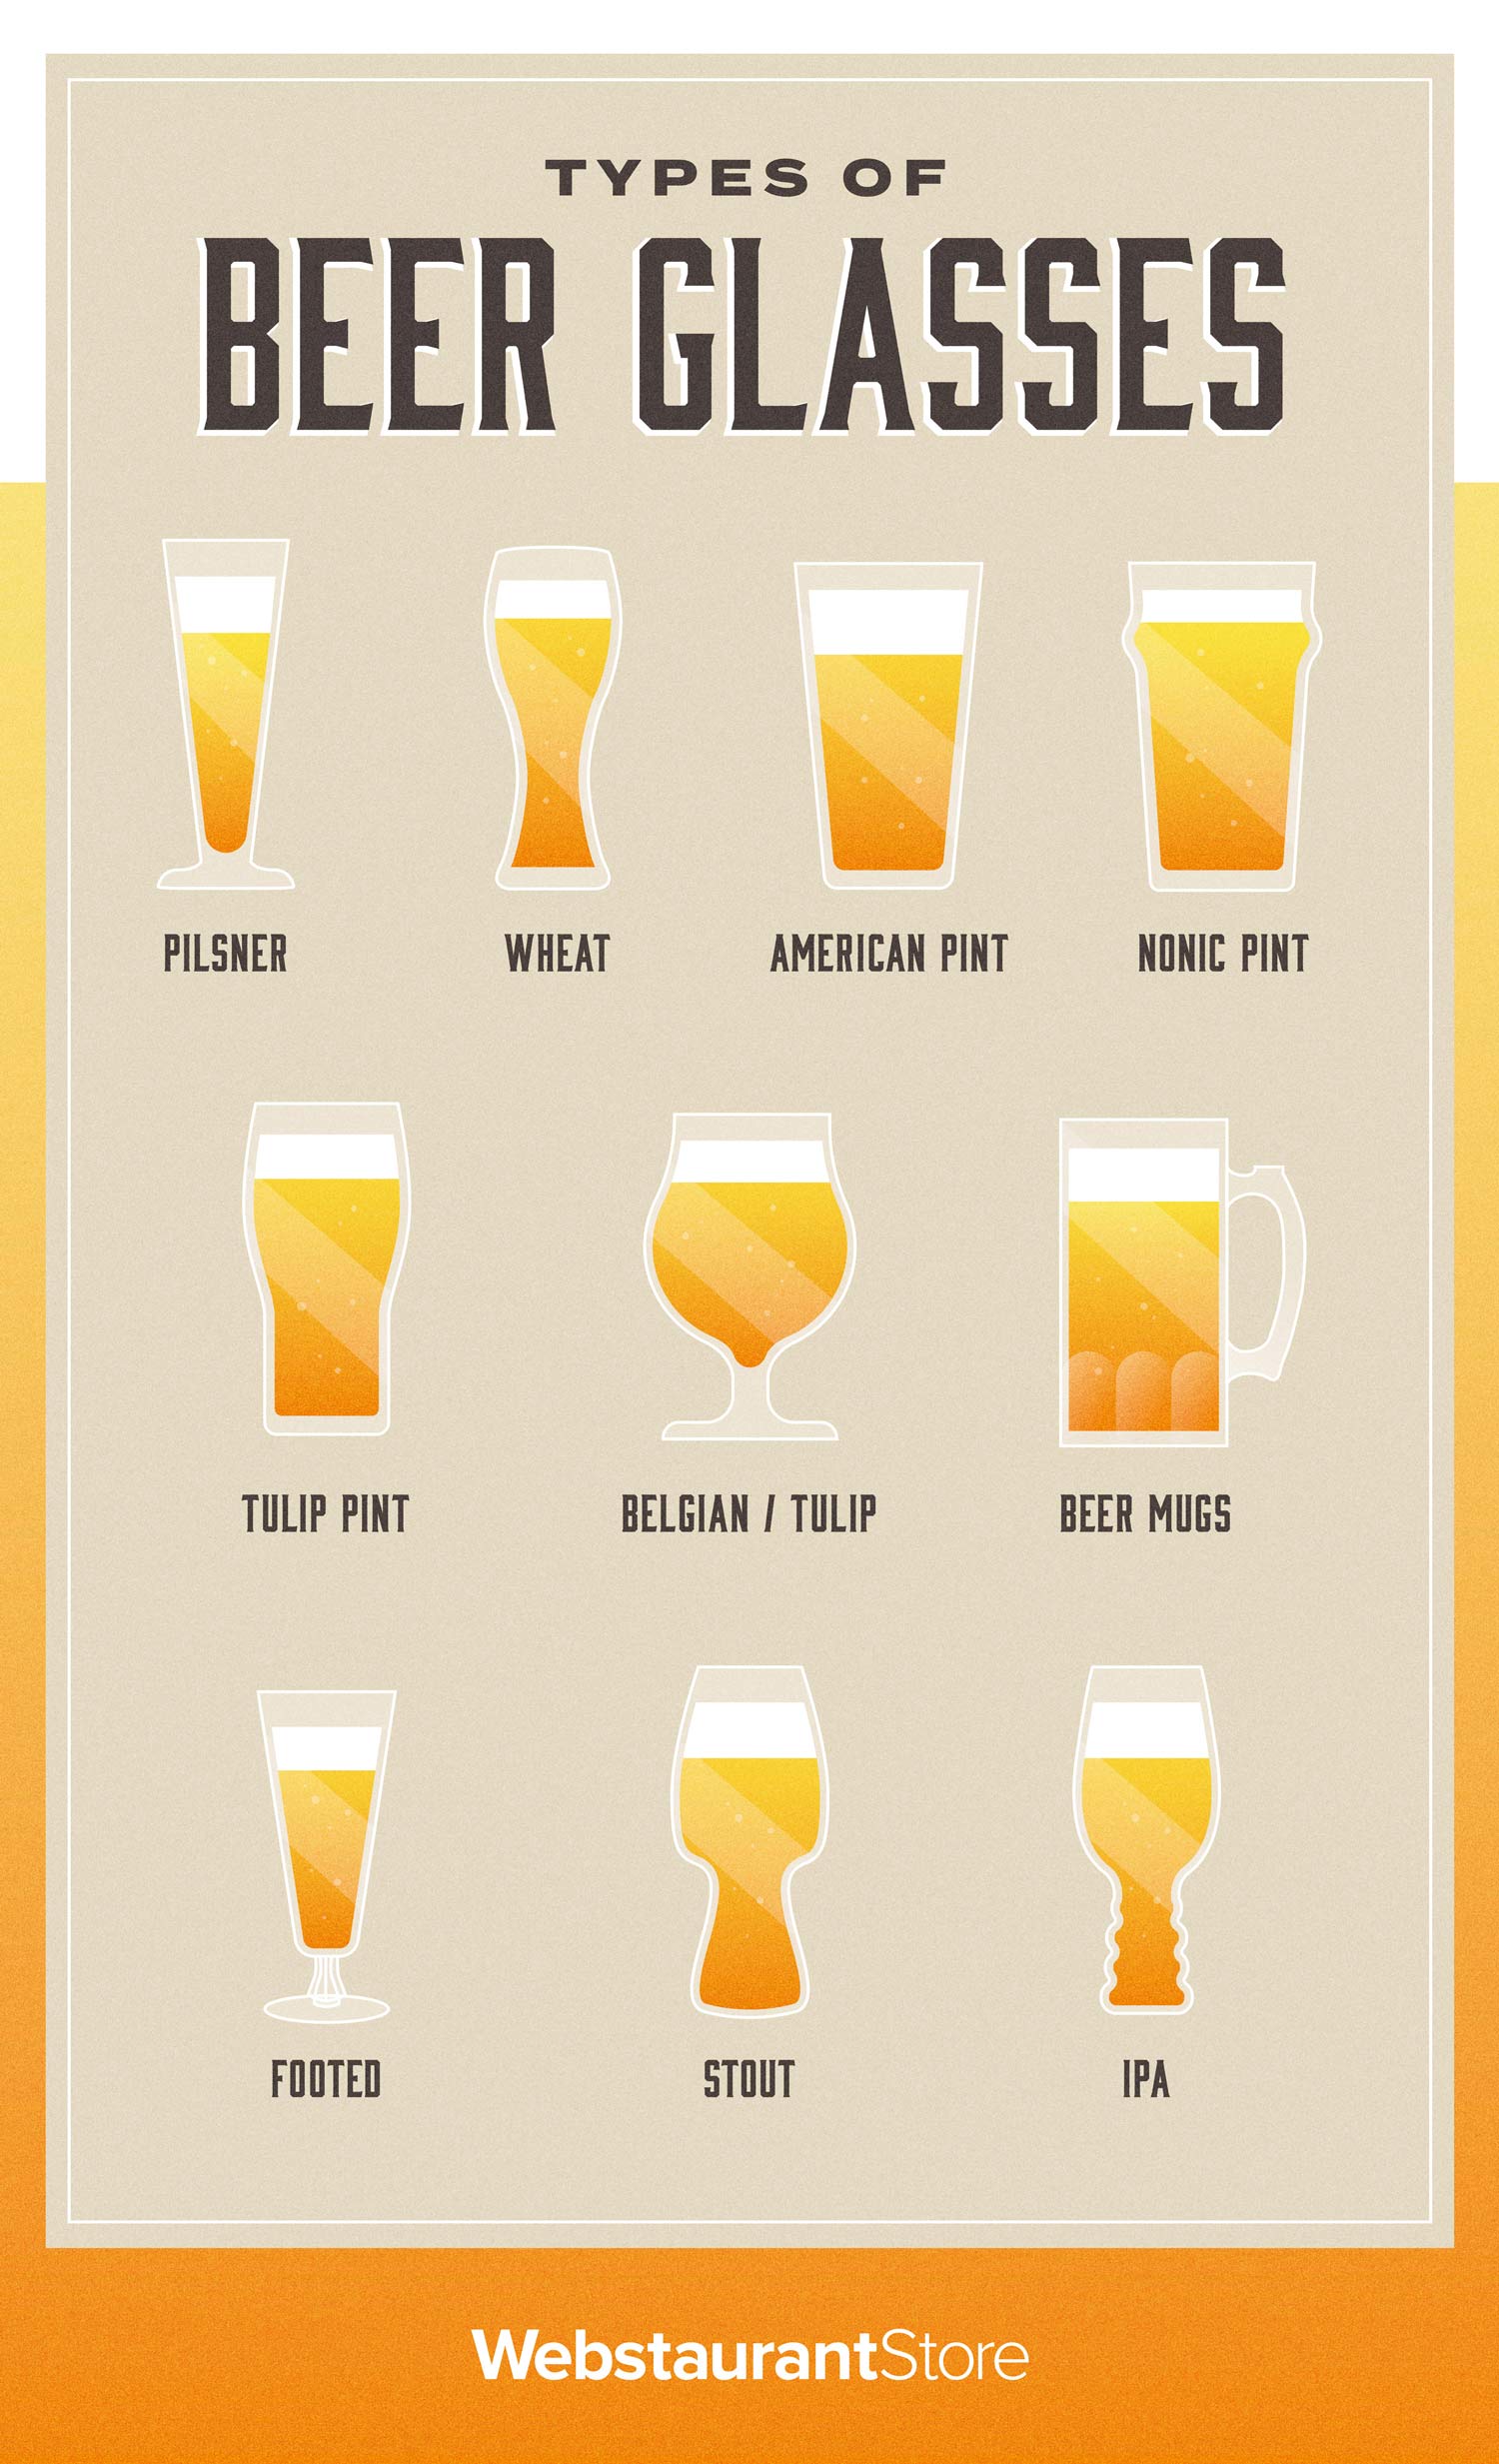 Types of beer glasses chart